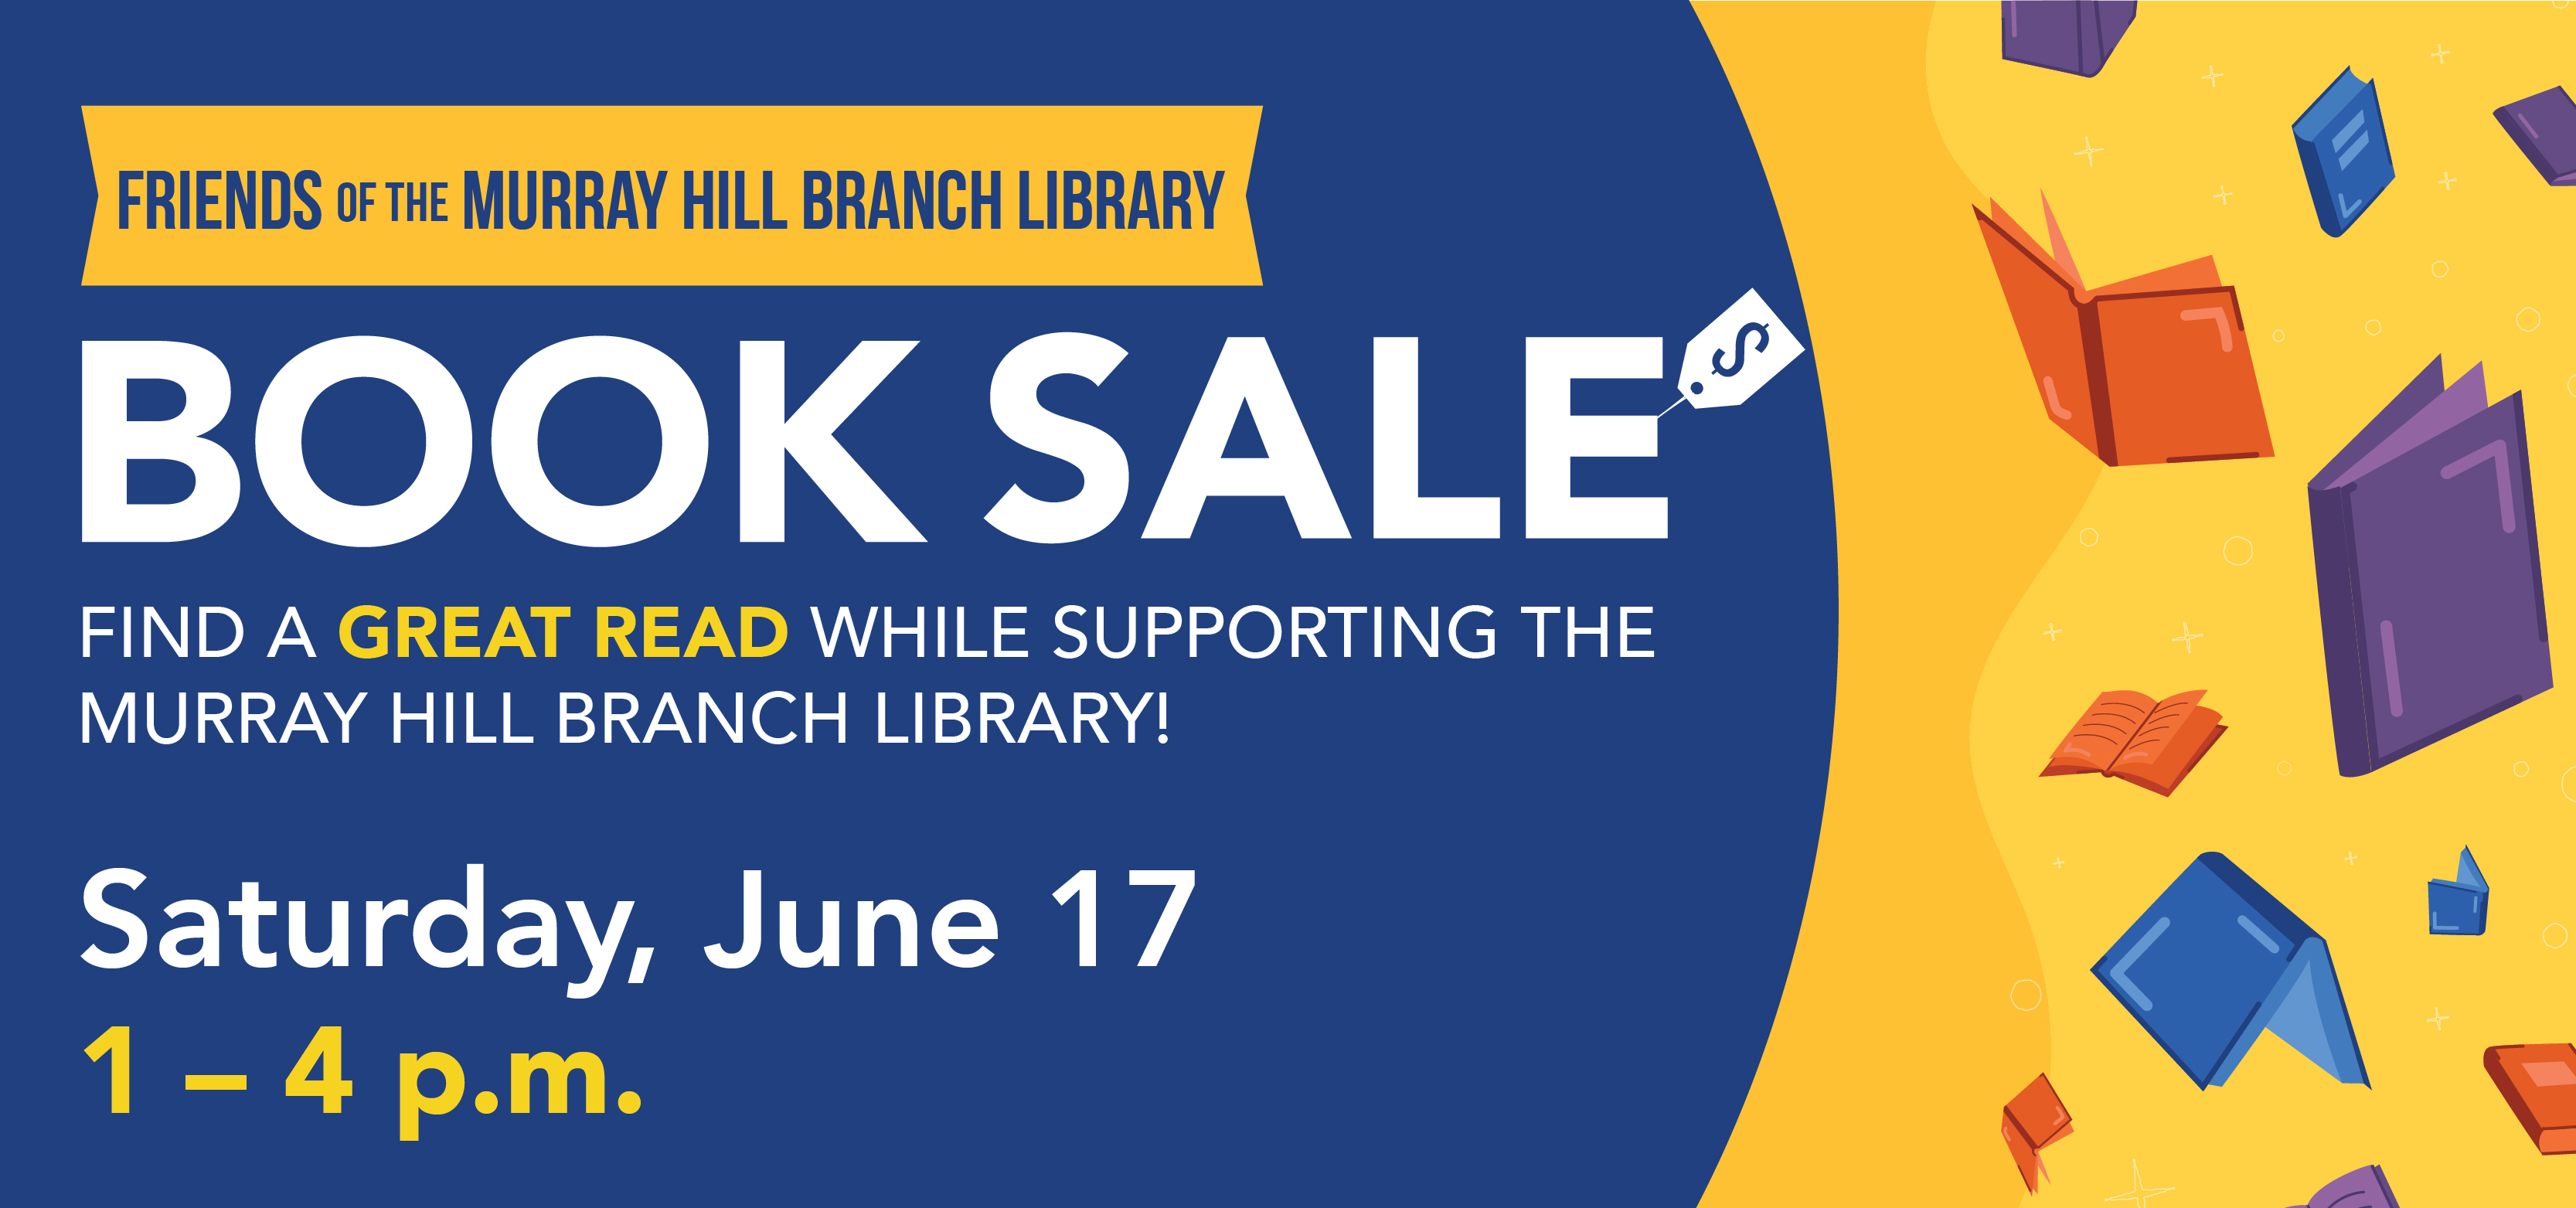 Friends of the Murray Hill Library book sale on Saturday, June 17, from 1 to 4 pm.